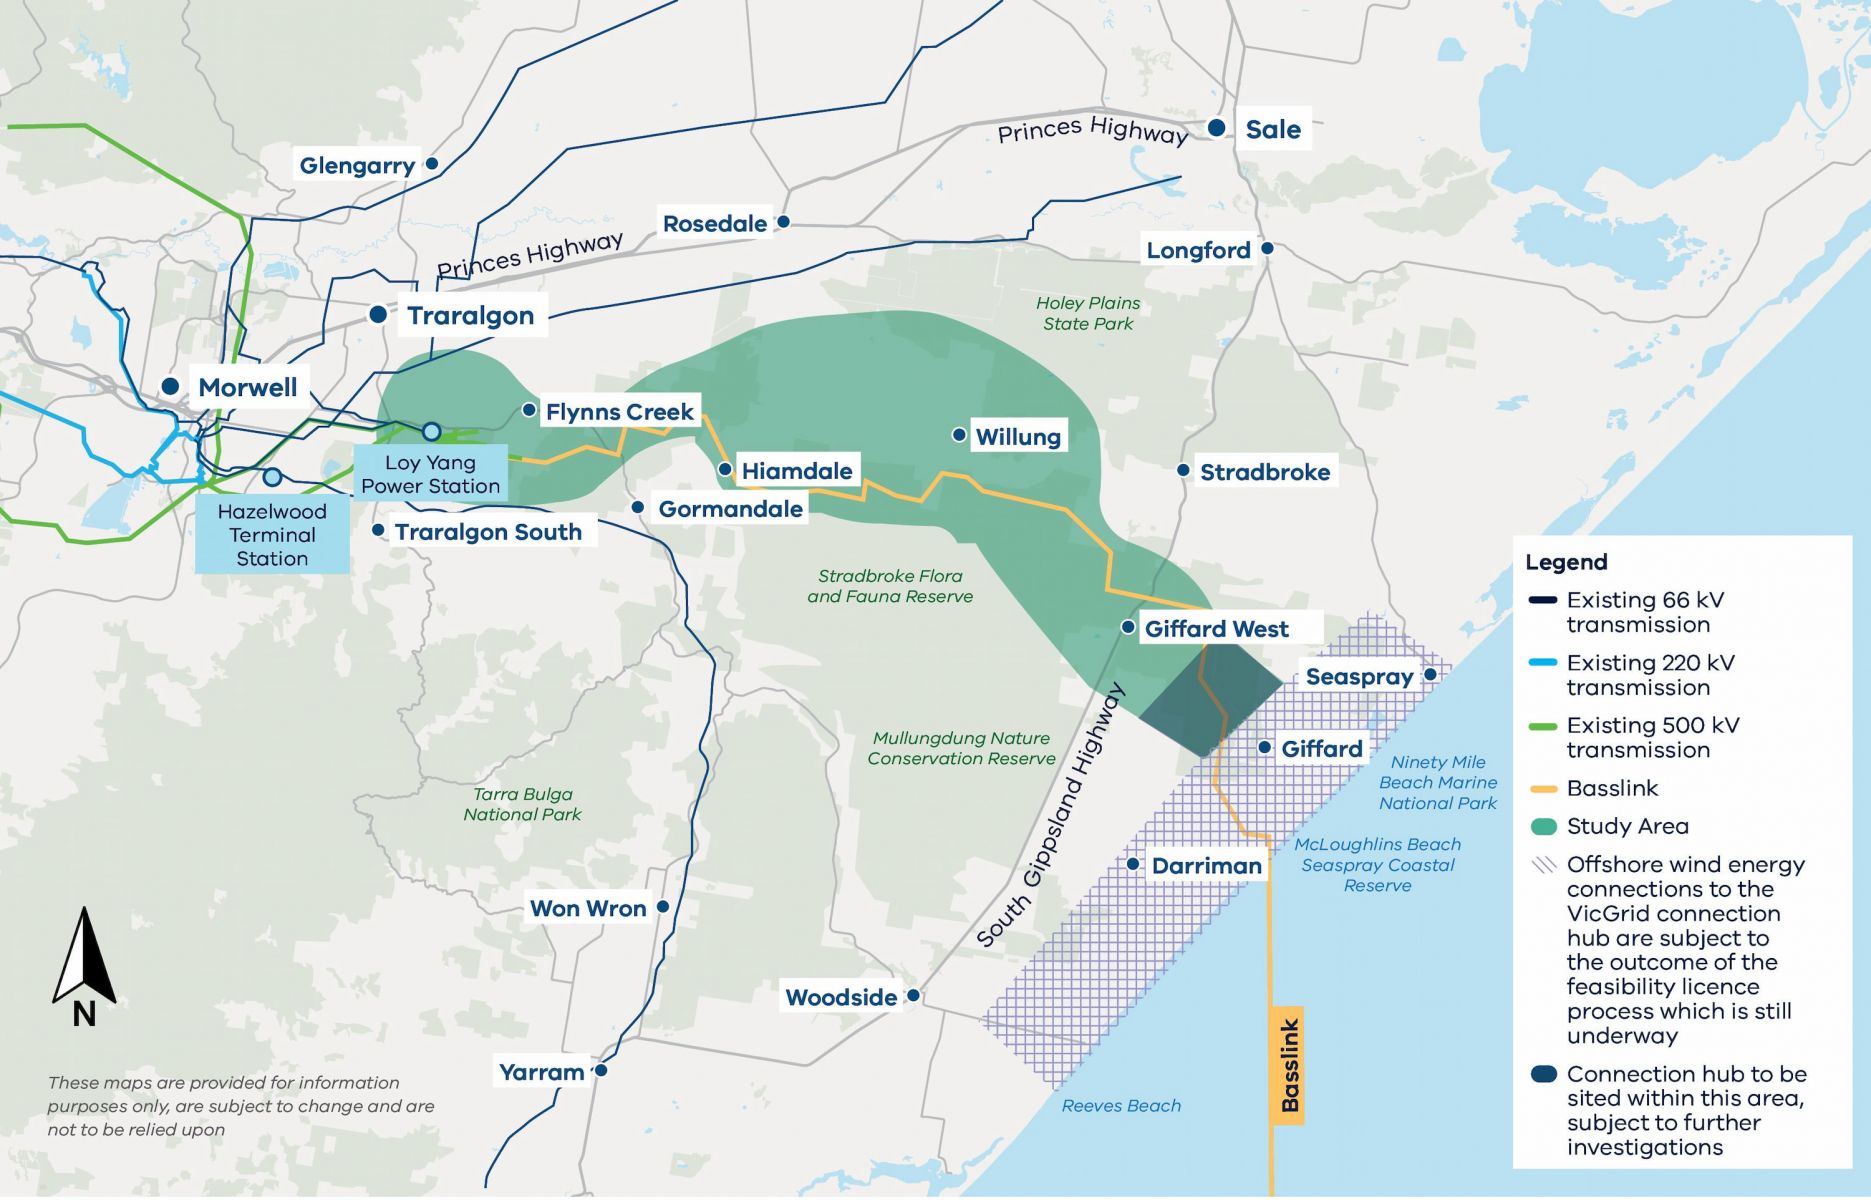 Gippsland offshore wind transmission study area starts about 6 km from the coast near Giffard and travels northwest past Stradbroke West, to Willung, across to Flynns Creek and on to the Loy Yang Power Station